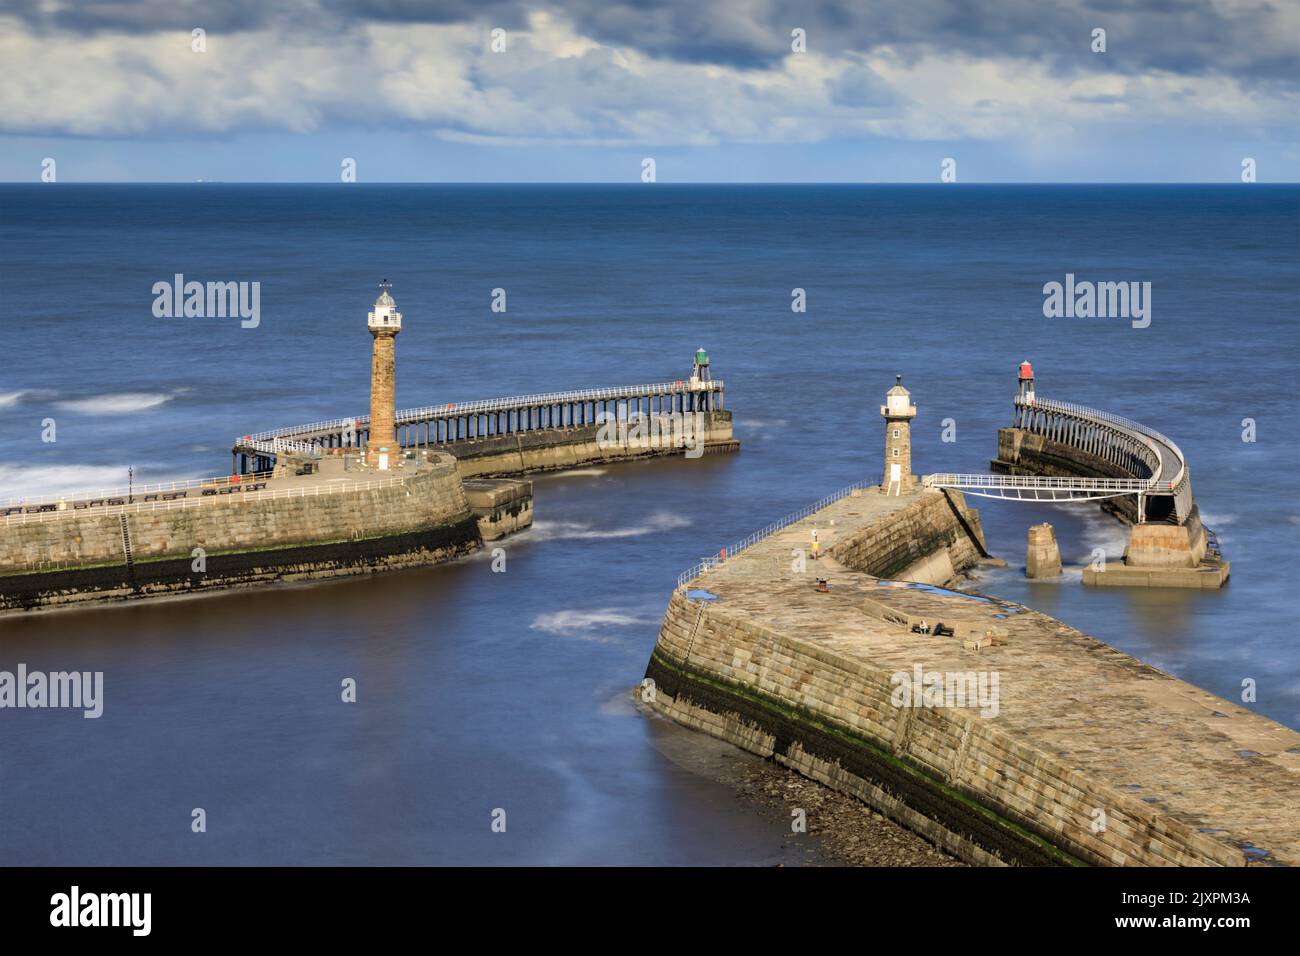 The mouth of Whitby Harbour captured from St Mary's Churchyard using a long shutter speed. Stock Photo